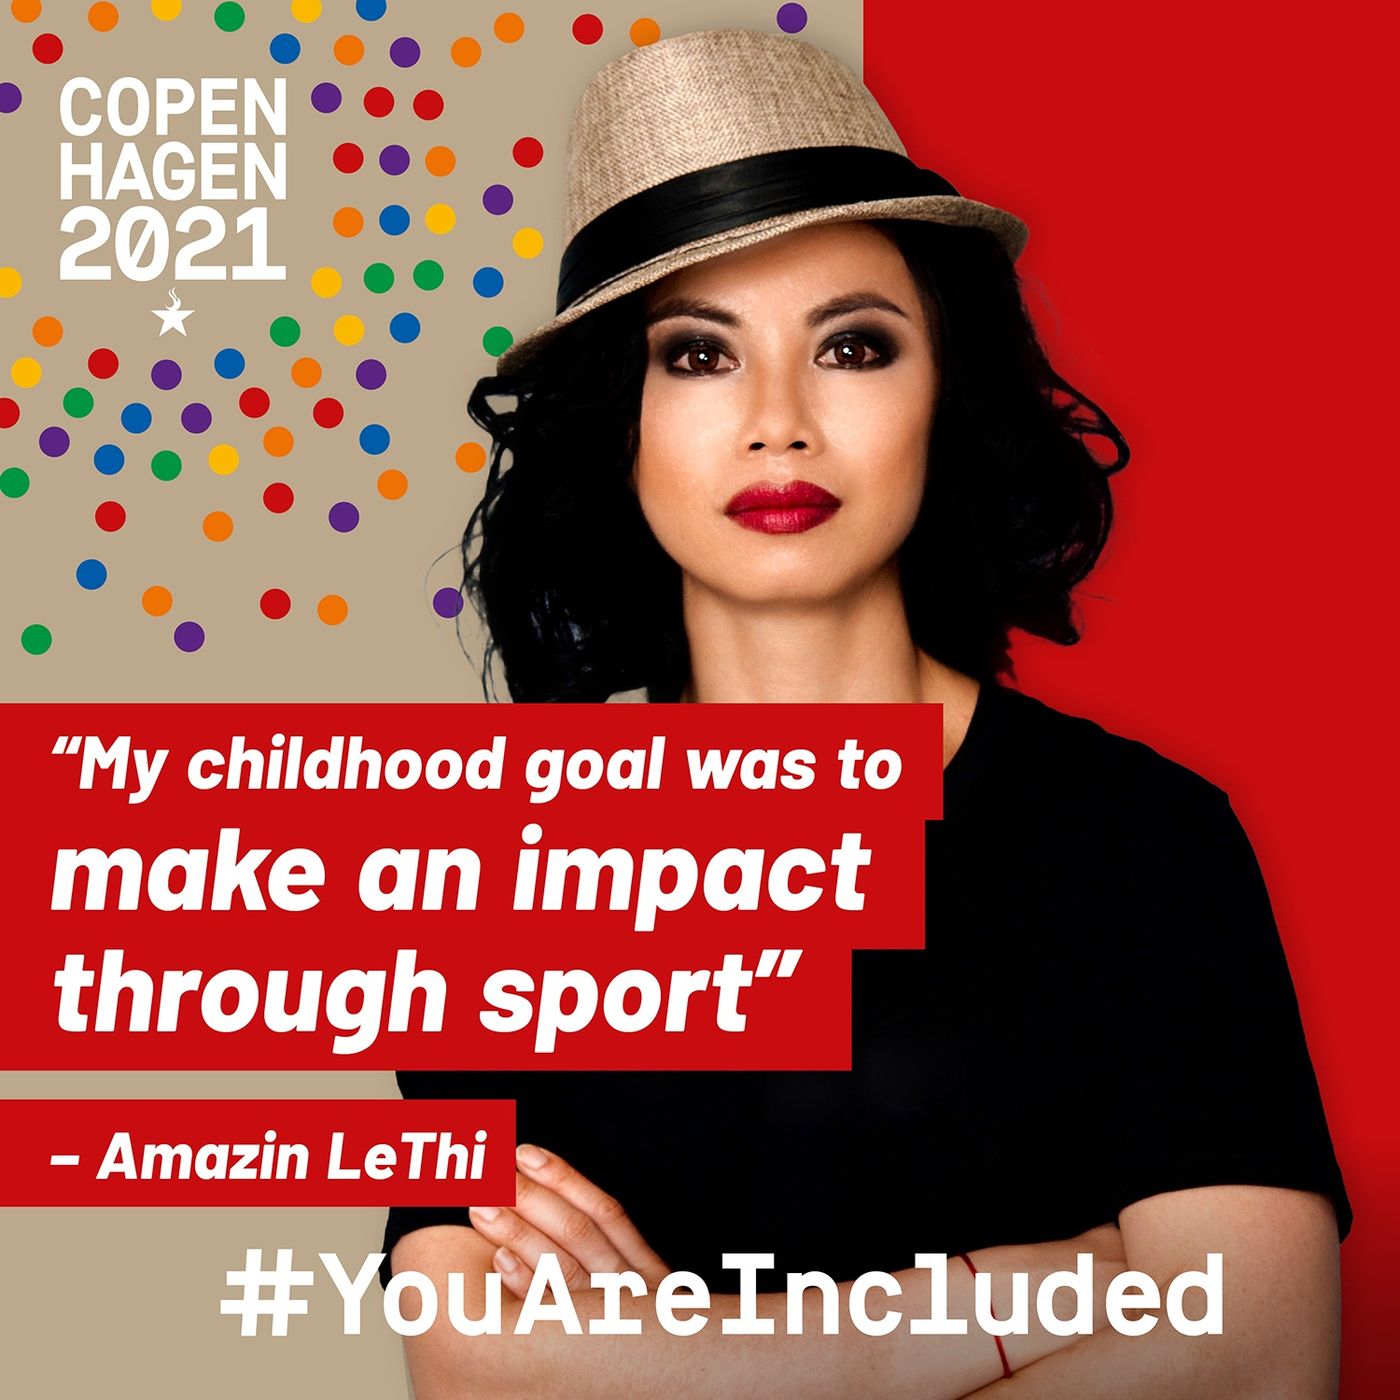 31. "My childhood goal was to make an impact through sport" - Amazin LeThi